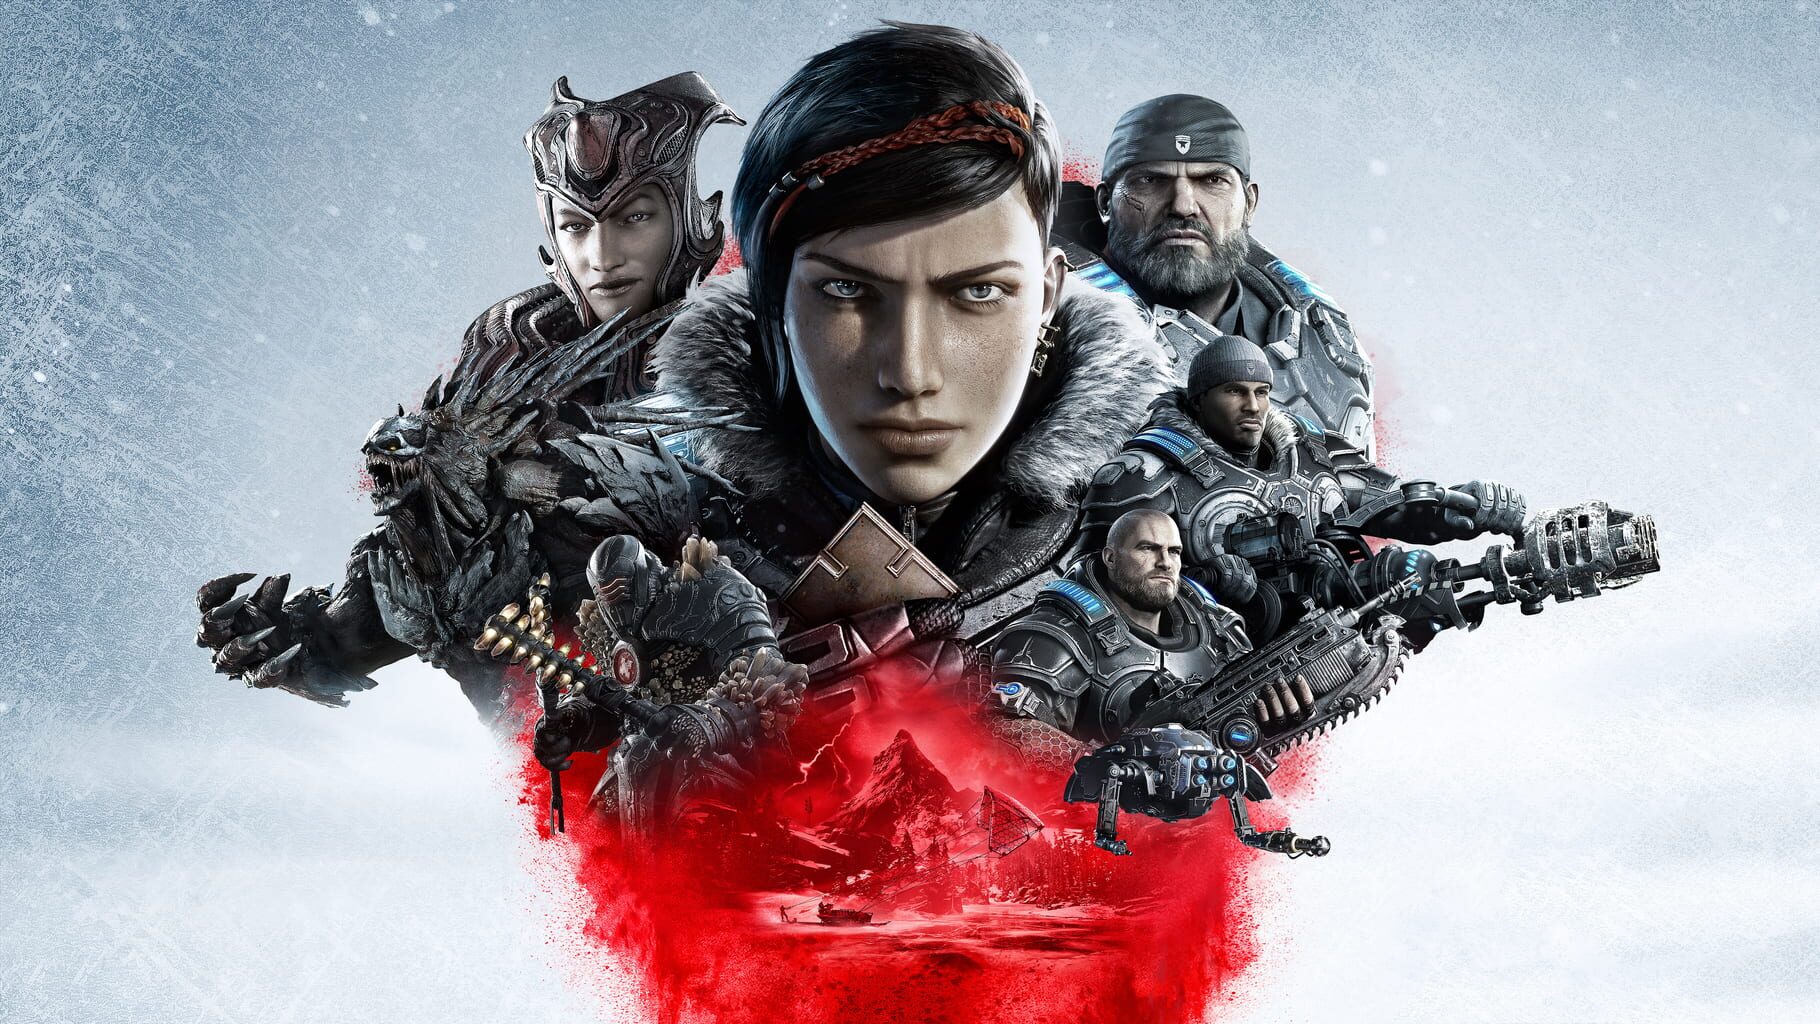 Gears 5: Game of the Year Edition Image